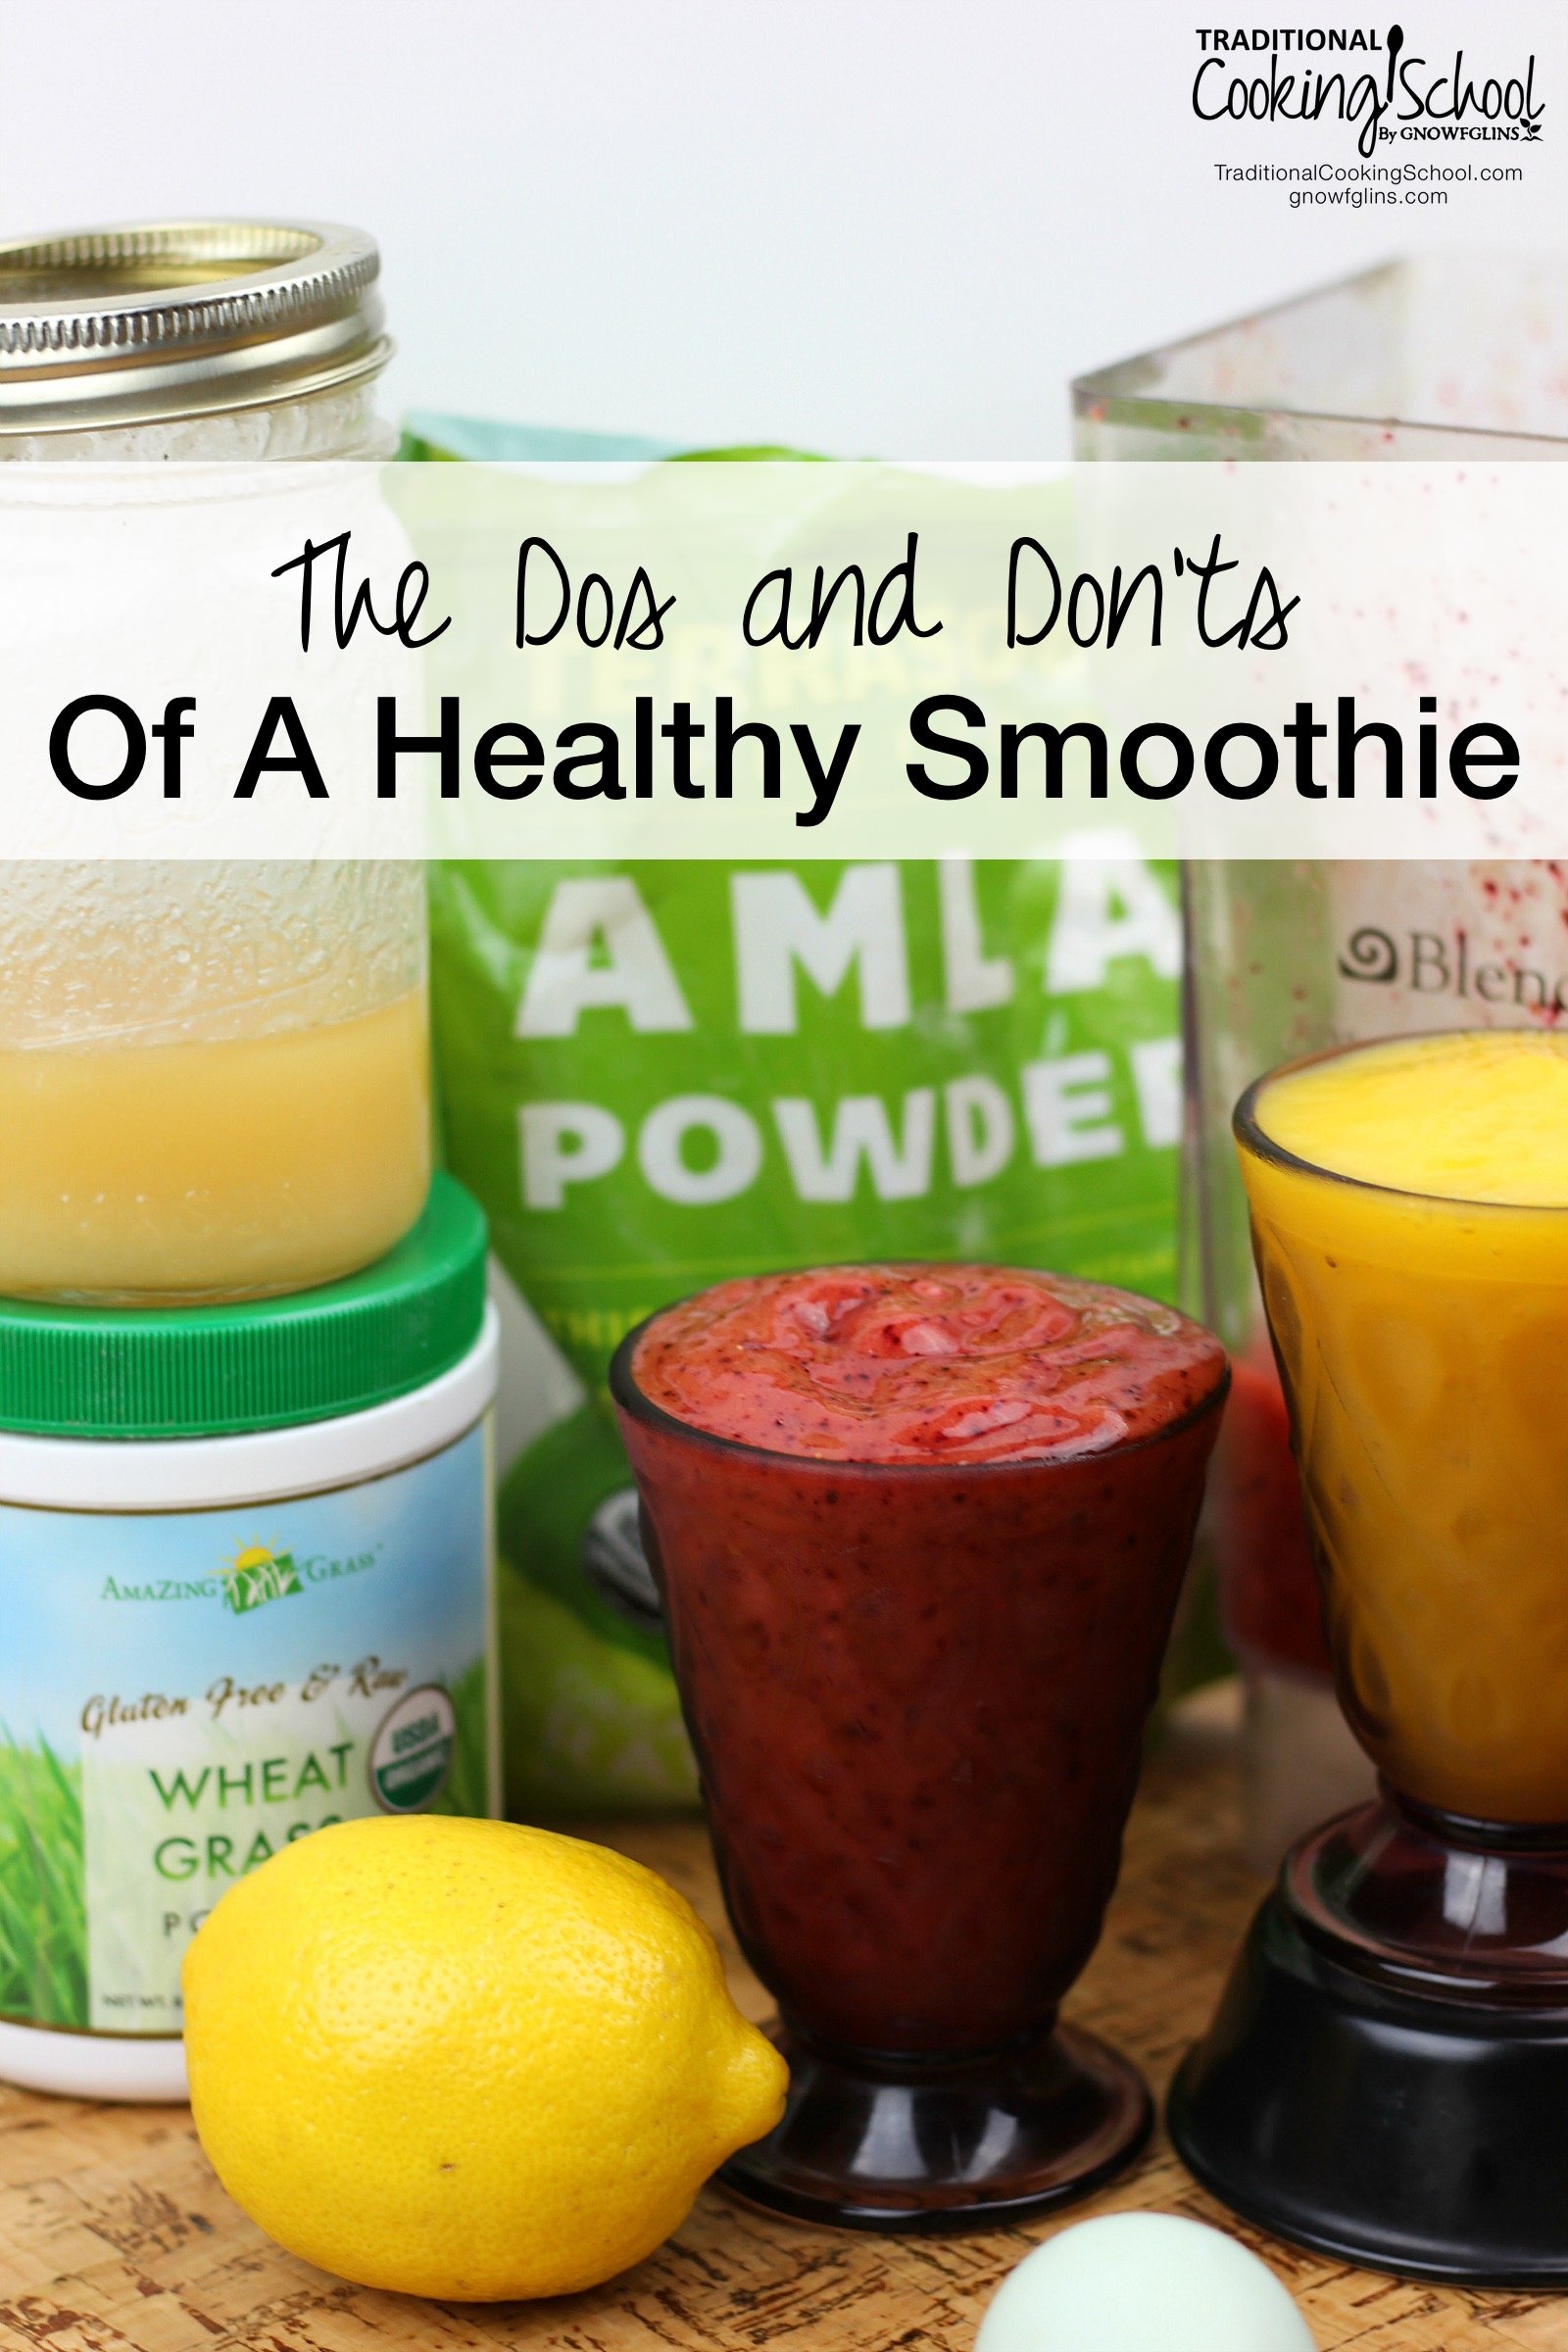 How To Make A Healthy Smoothie: The Dos and Don